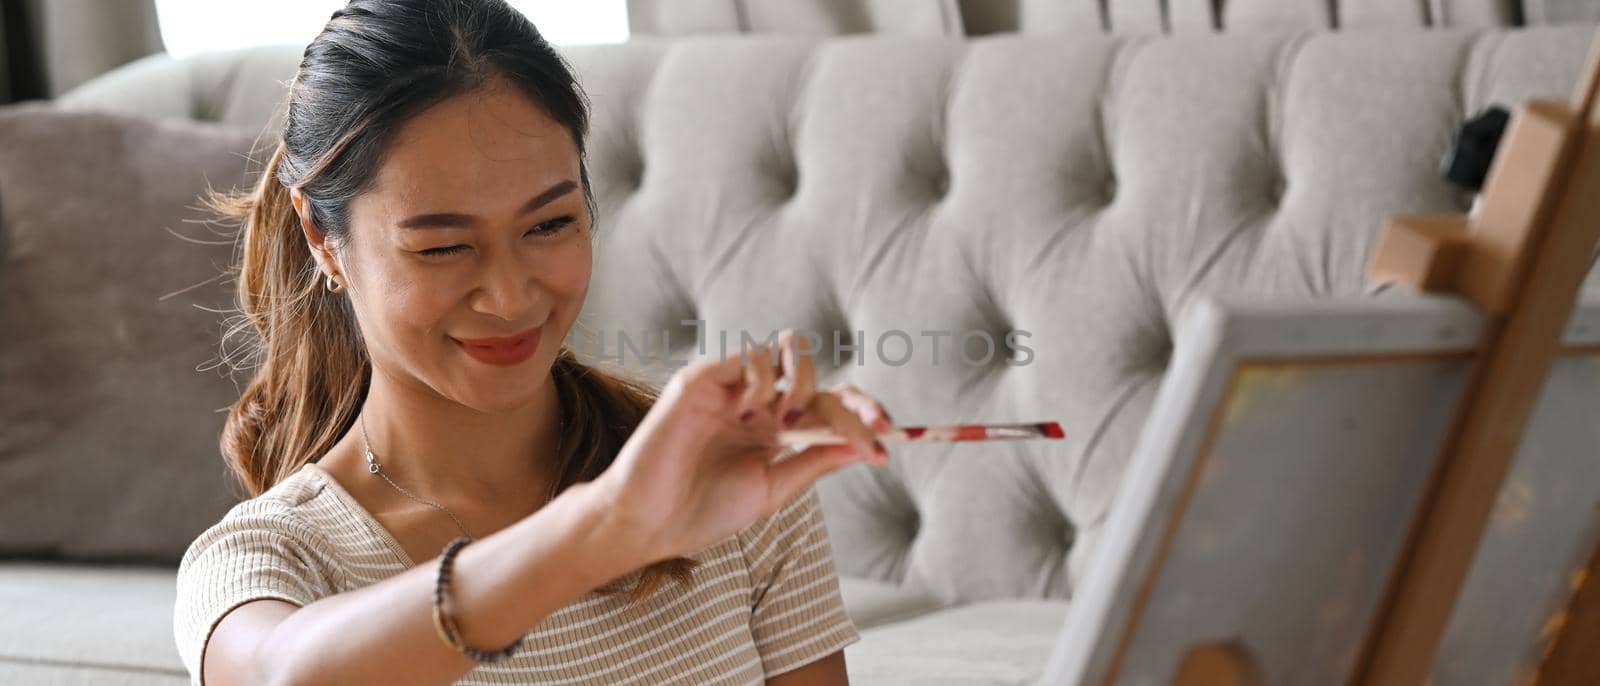 Attractive woman holding paintbrush enjoy creating artwork at home.